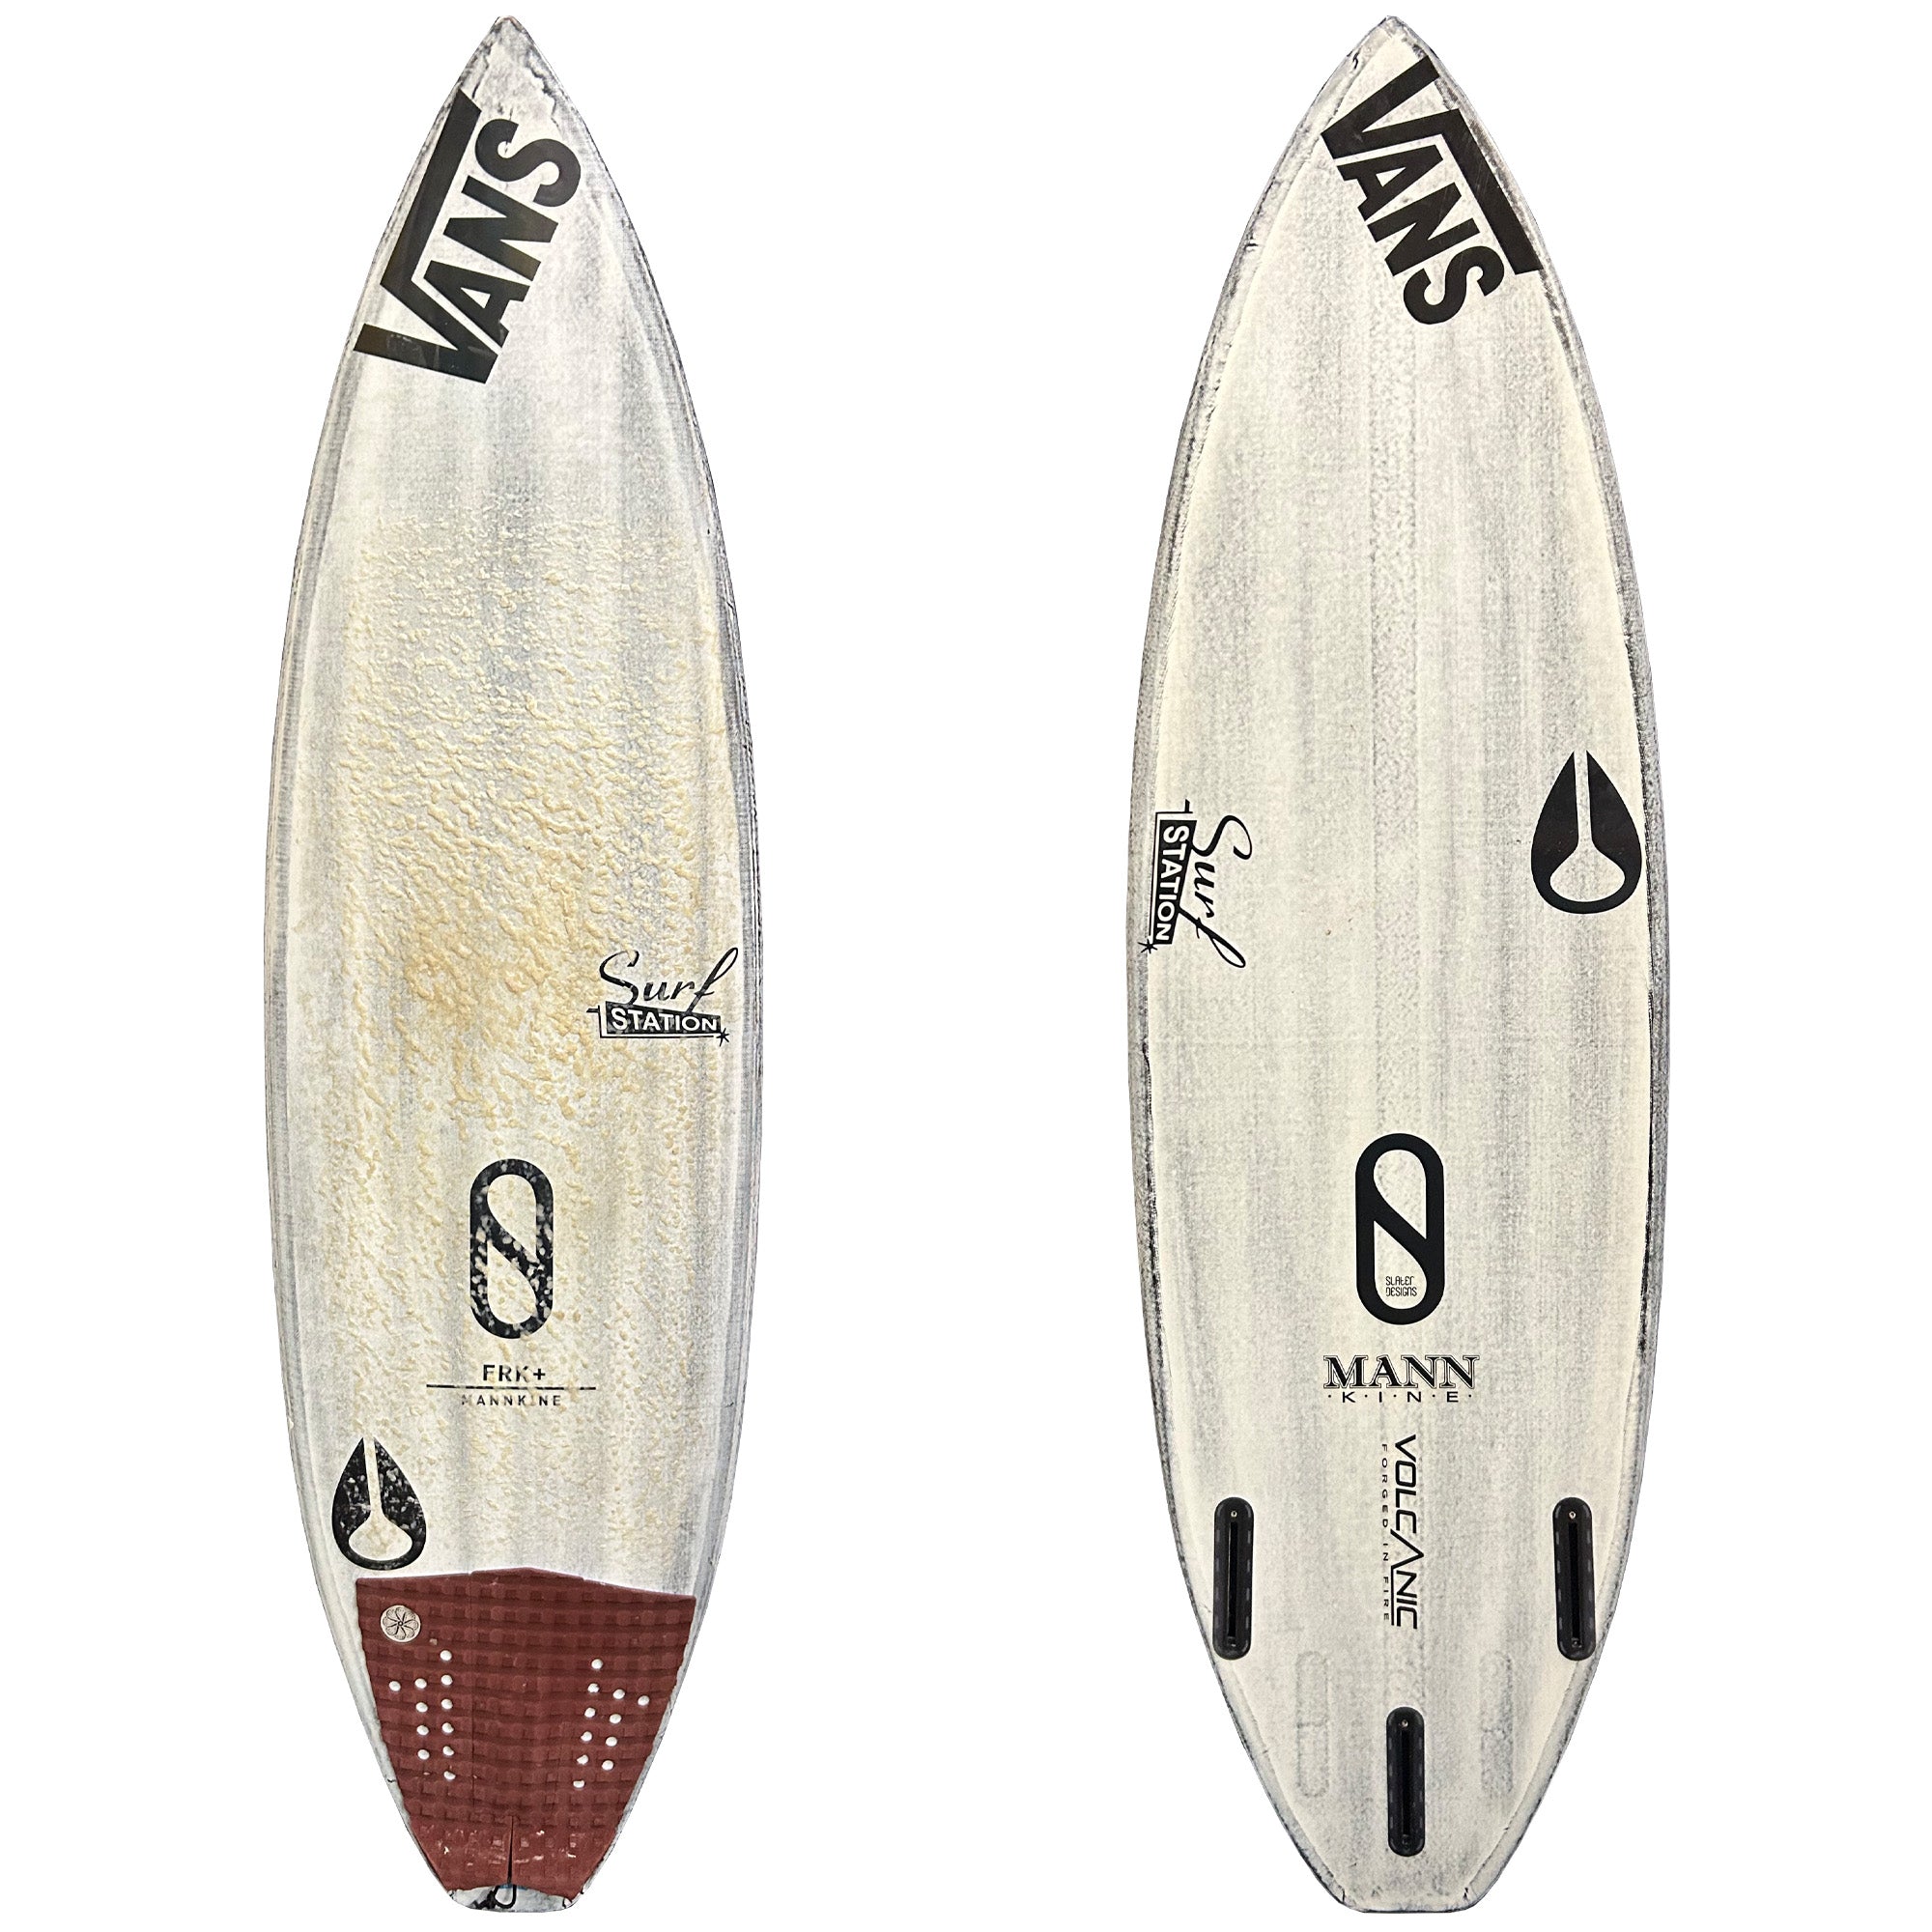 Firewire FRK+ 5'2 Volcanic Consignment Surfboard